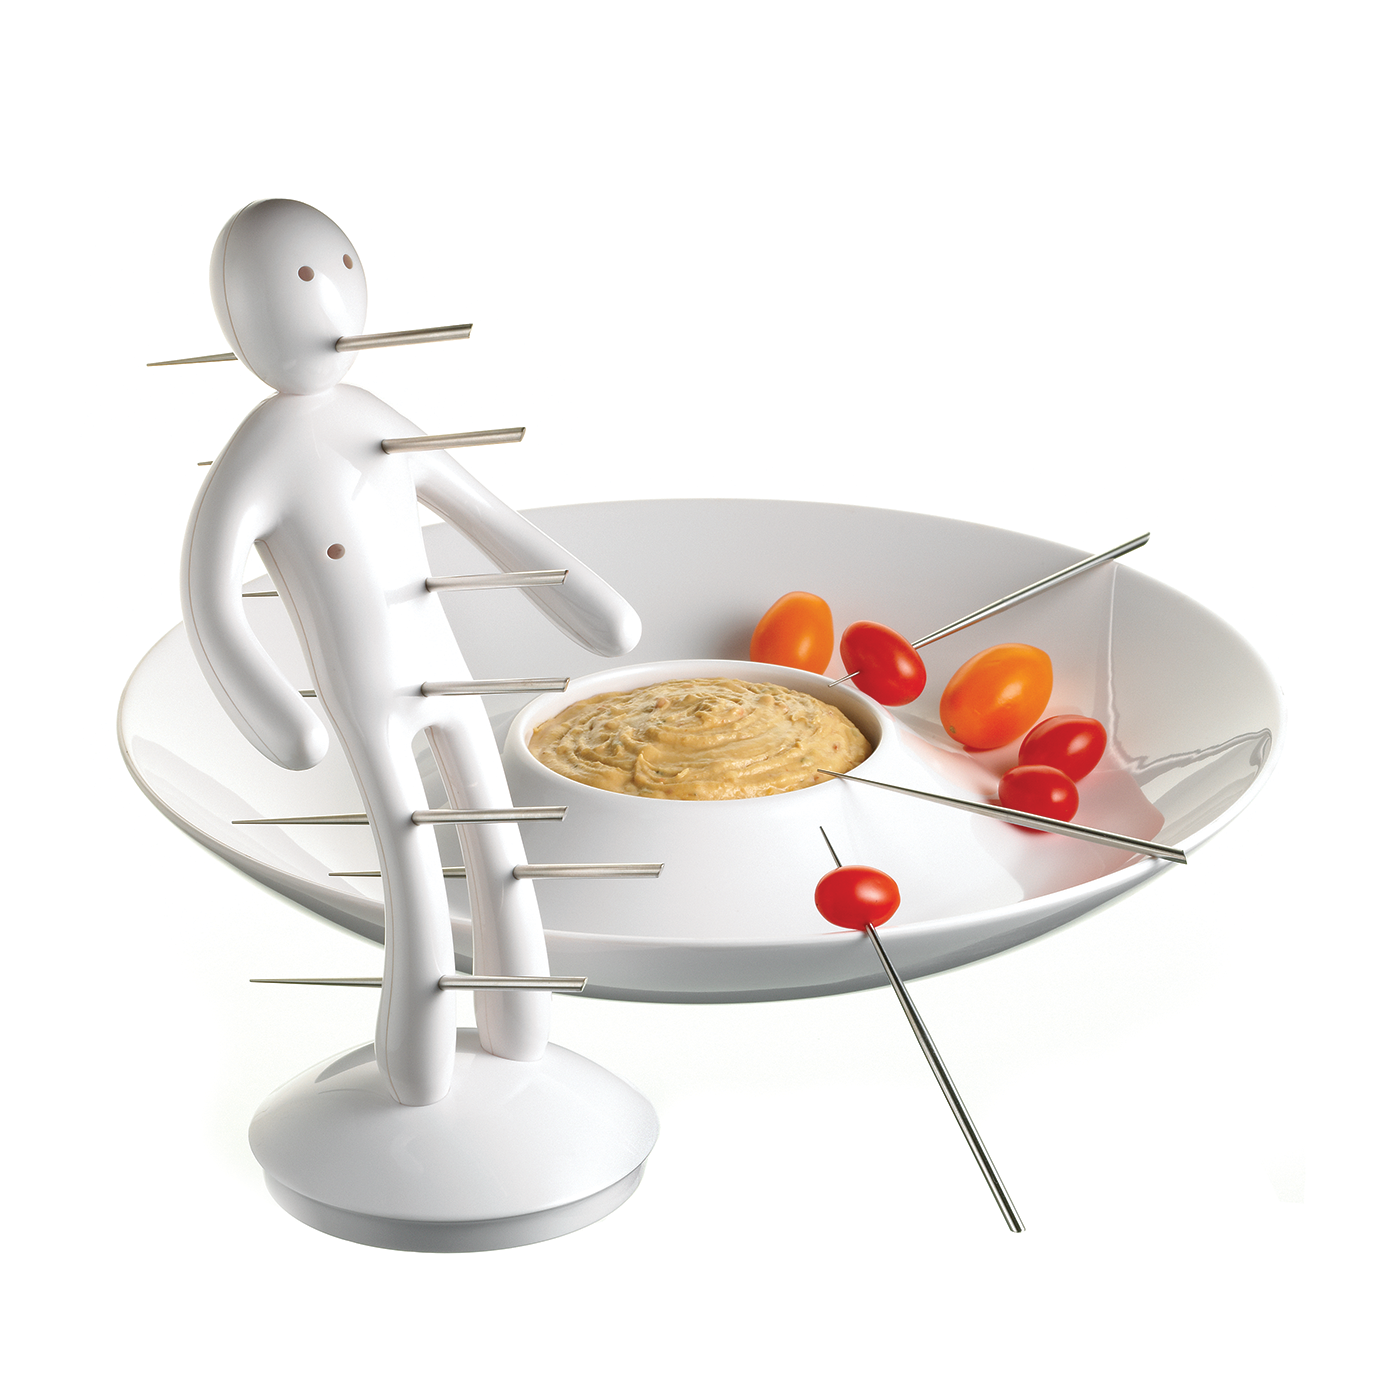 Voodoo/TheEx Aperitif Set - White Plastic Holder and Tray